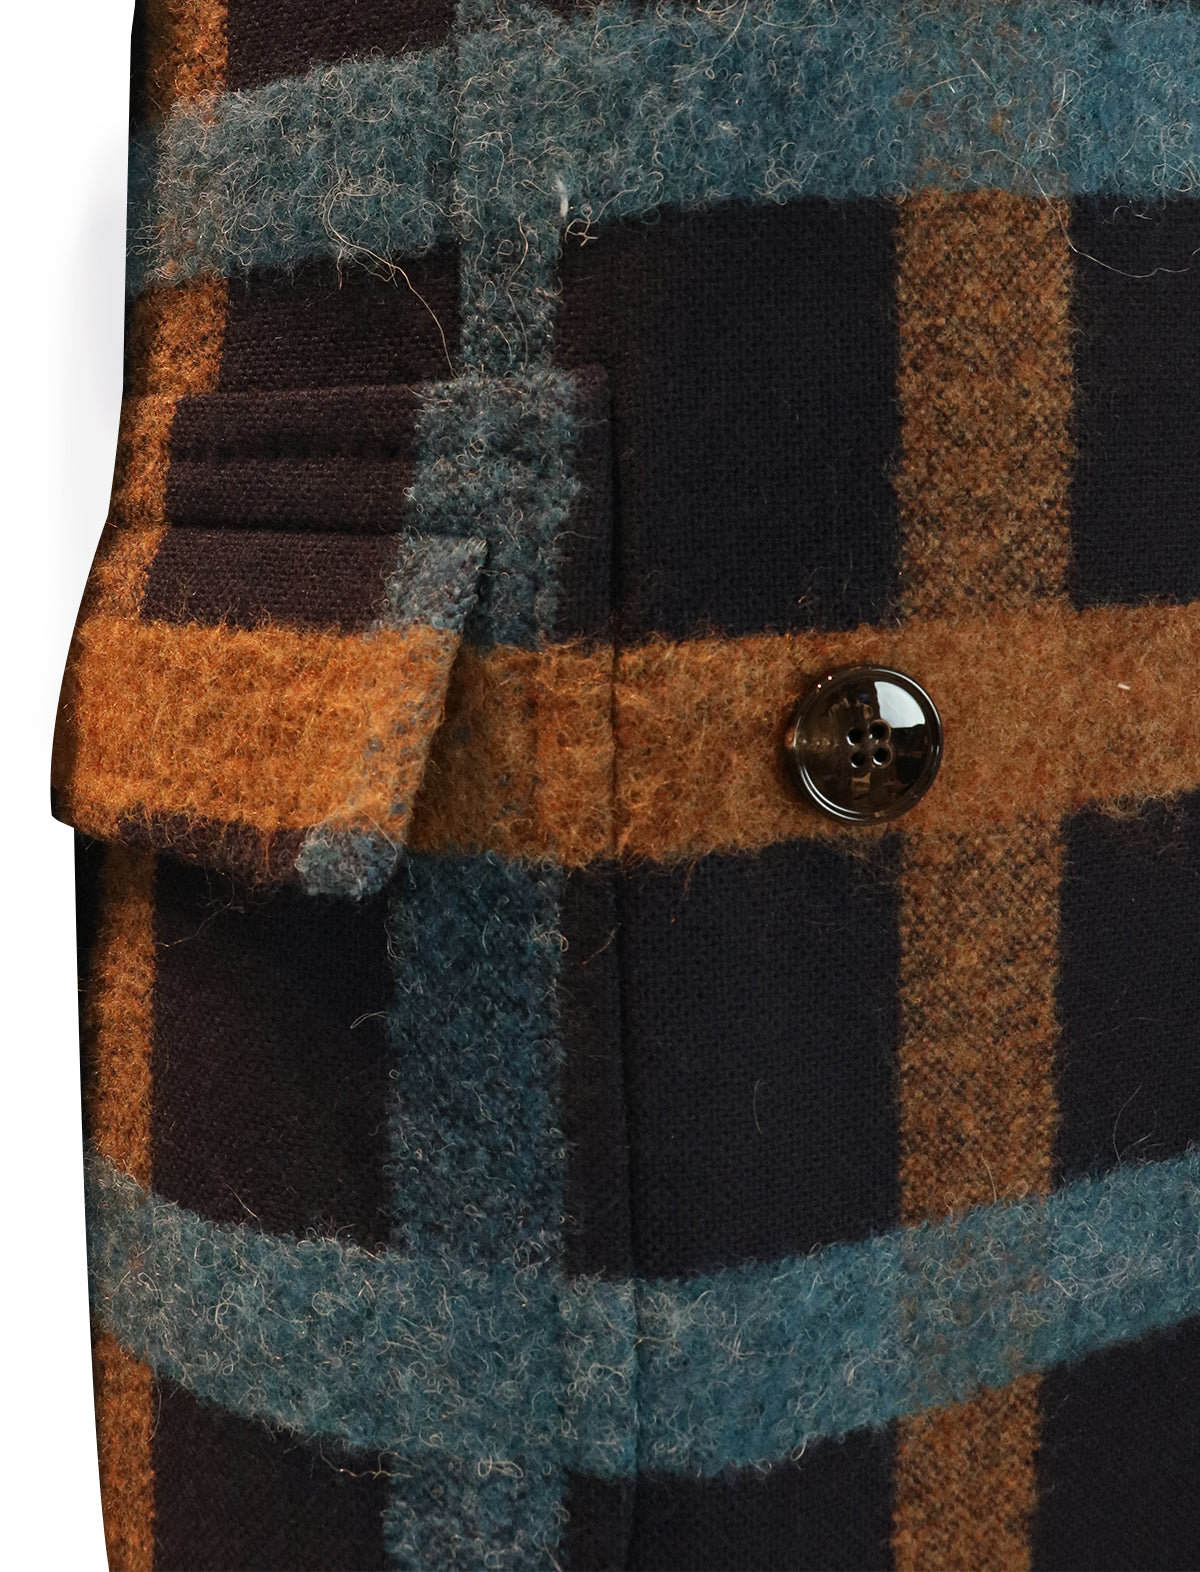 GABRIELE PASINI Ulster Checked Coat in Blue/Brown